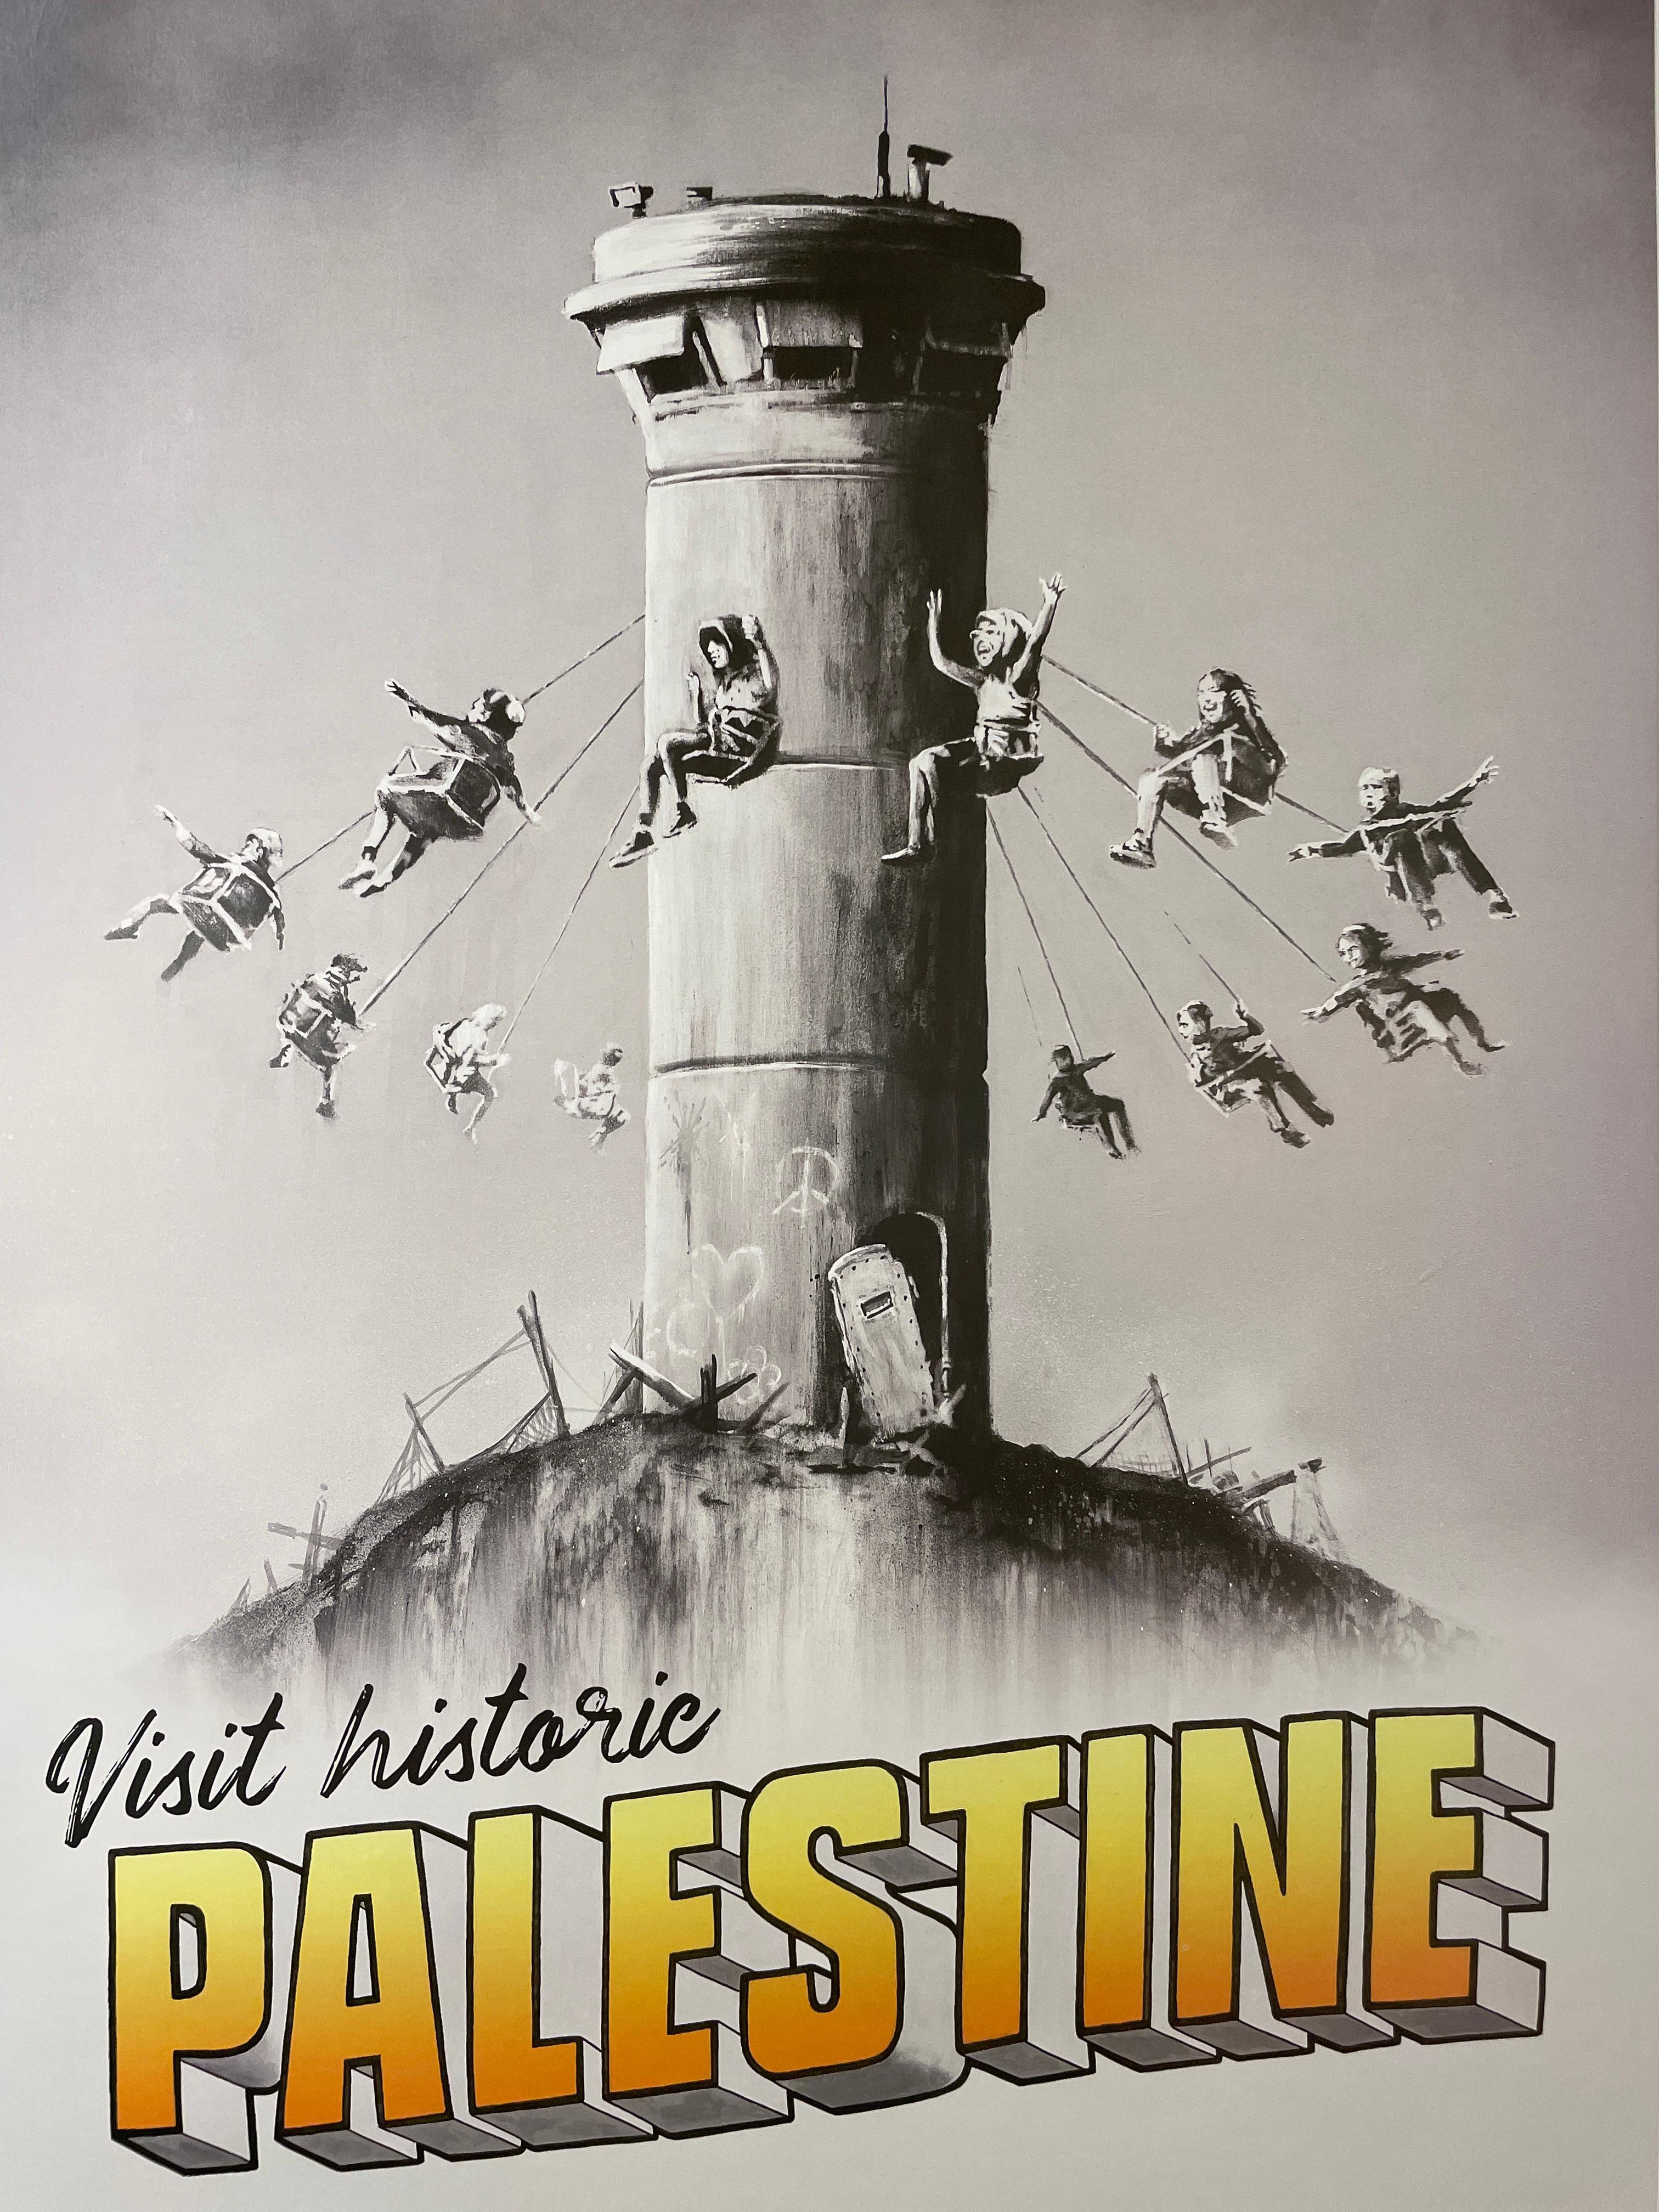 Banksy

Visit Historic Palestine Print

Mint Condition

The only way to obtain this print was by staying overnight in the Hotel in Bethlehem.  On the verso of the print it is double stamped with the Walled Off Hotel Emblem.  

The artwork was